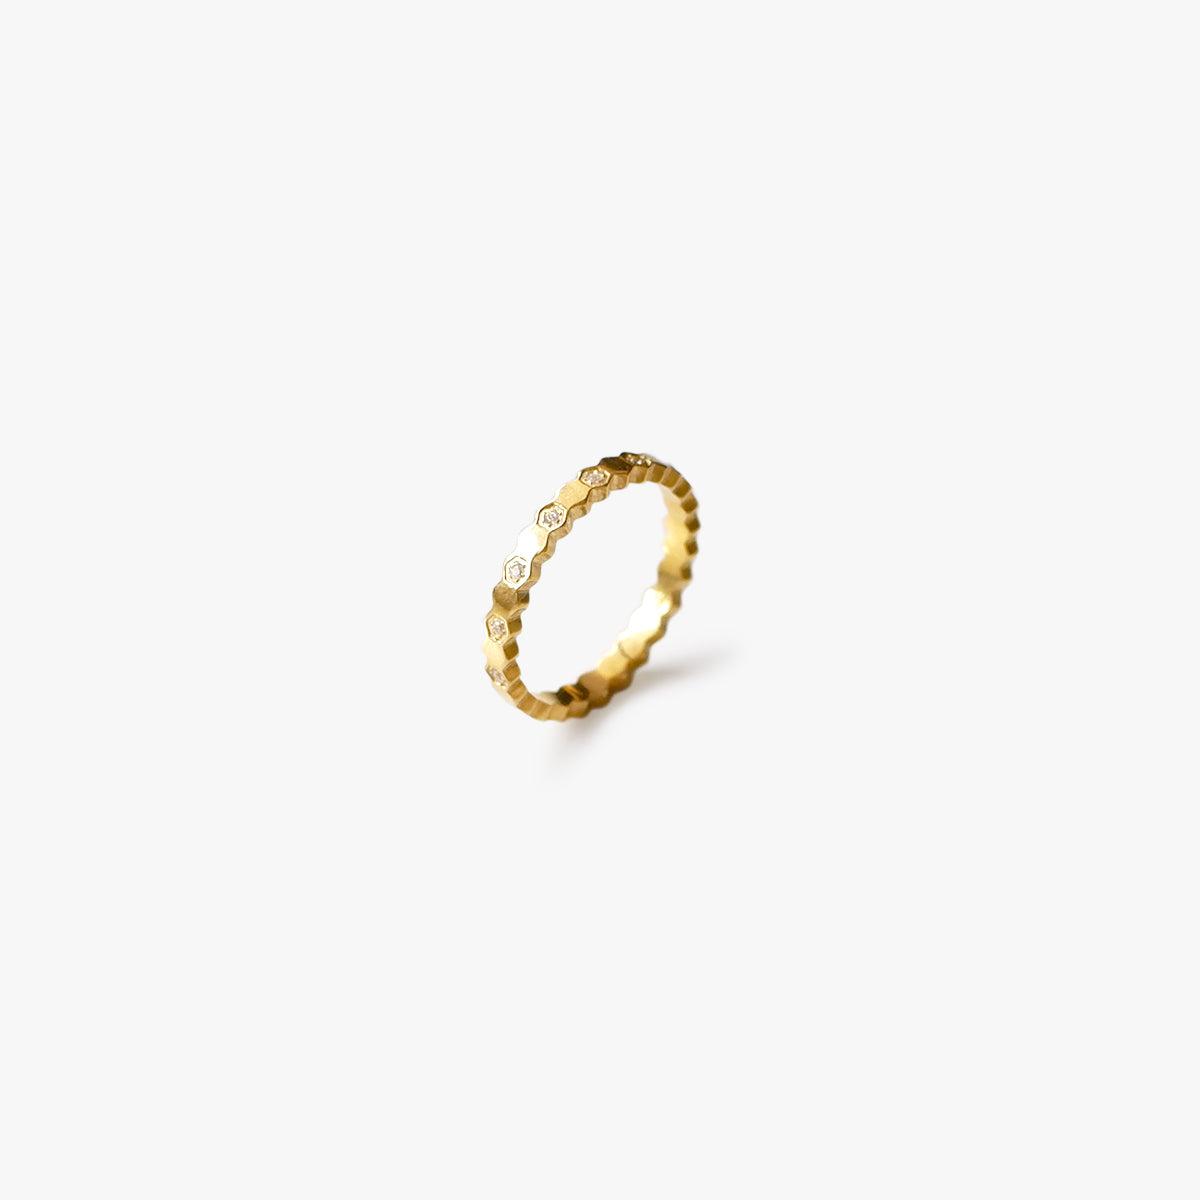 The Honey Pave Ring